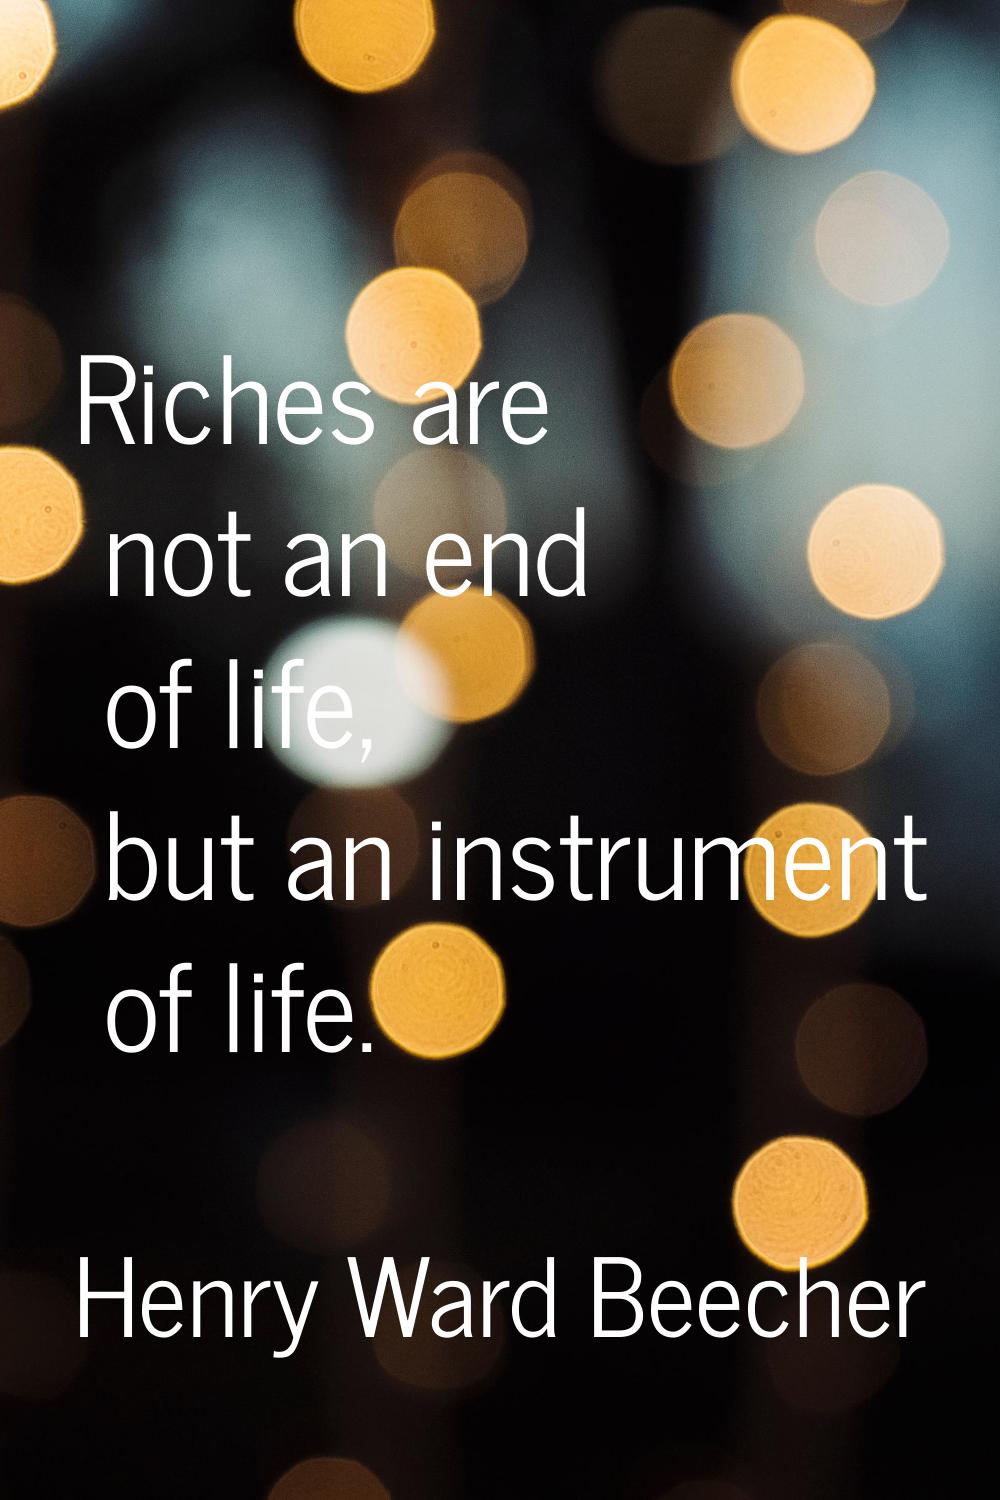 Riches are not an end of life, but an instrument of life.